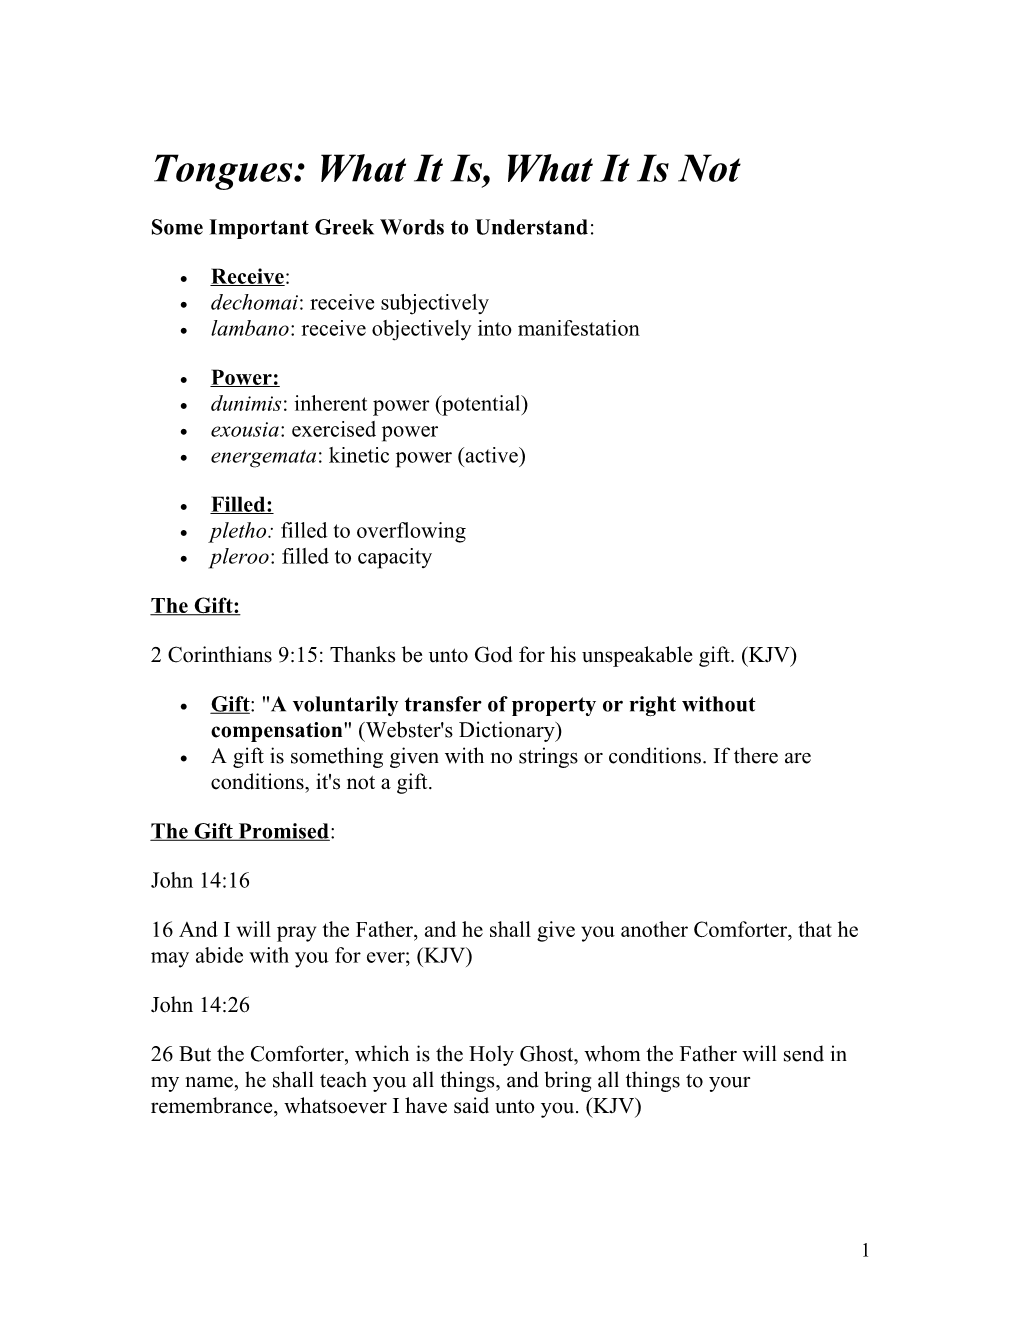 Tongues: What It Is, What It Is Not